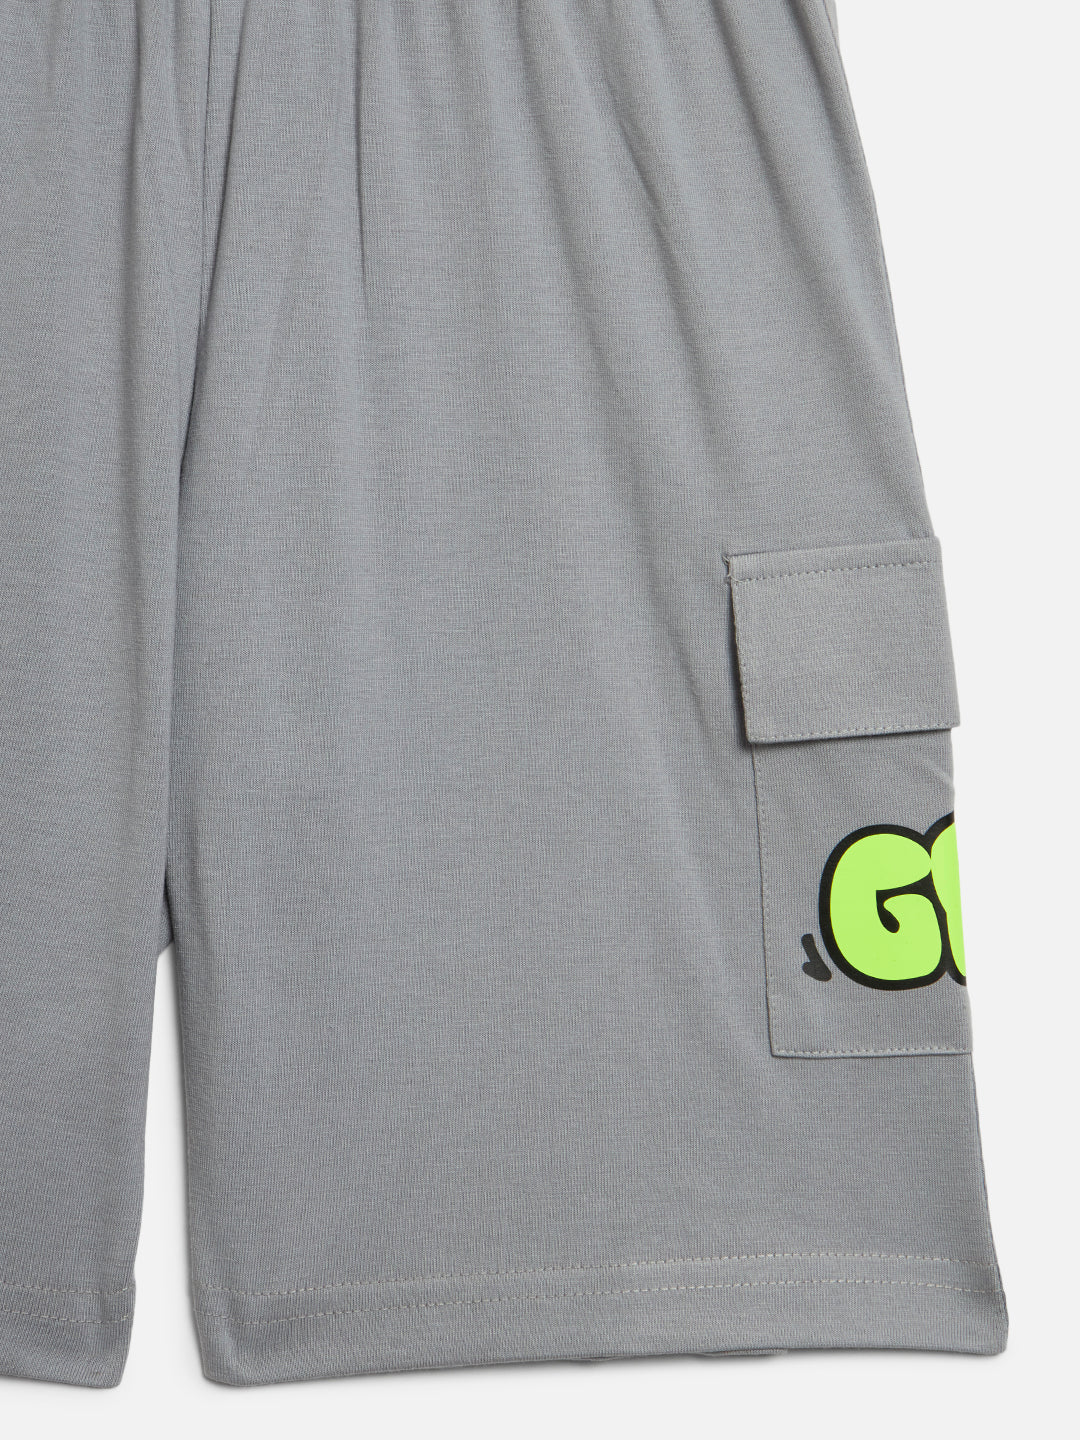 GRIFFEL Girls Kids Steel Grey Co-Ord T-shirt and Short Set - griffel